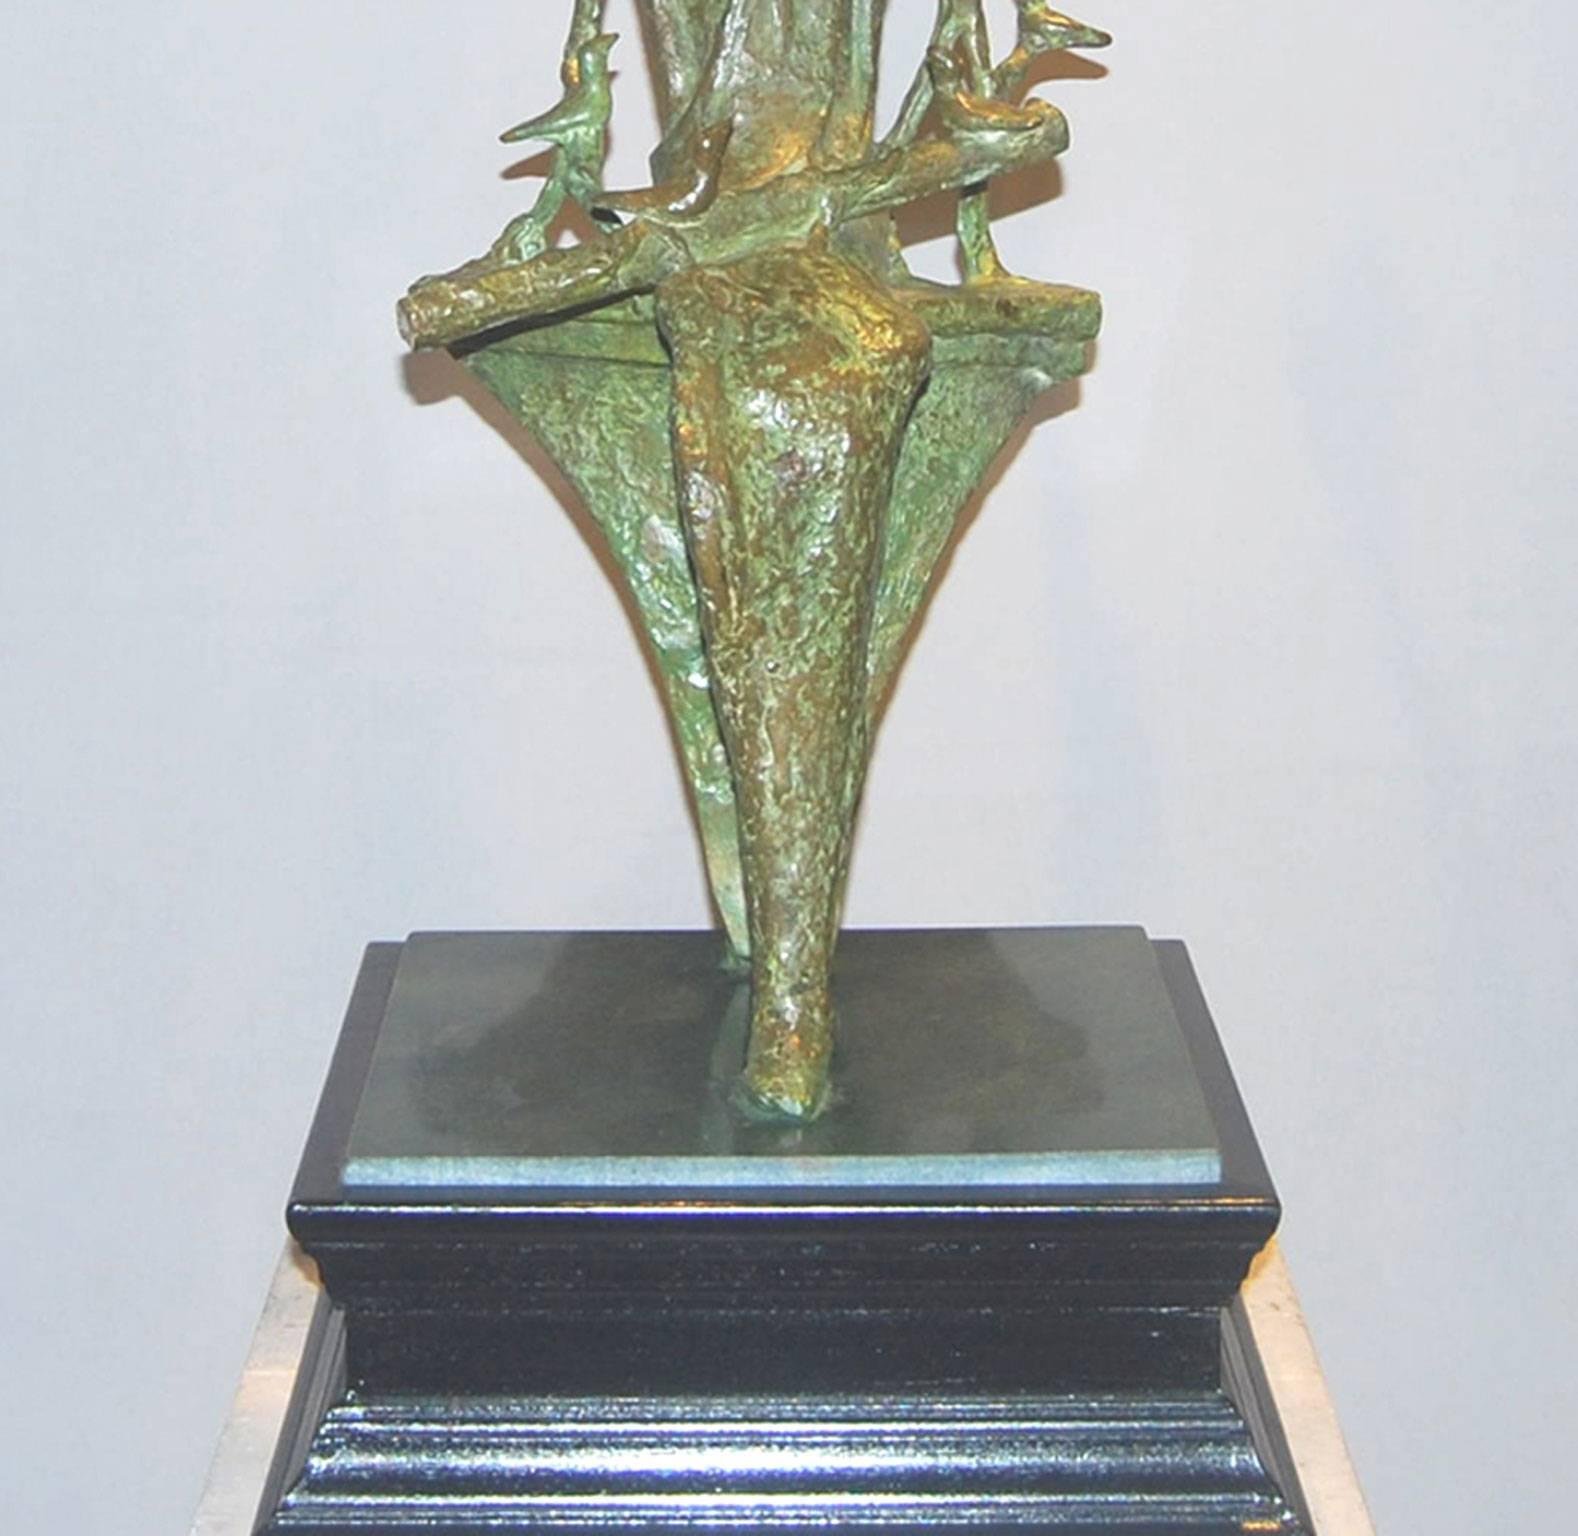 Piped Piper - Gold Figurative Sculpture by Tushar Kanti Das Roy